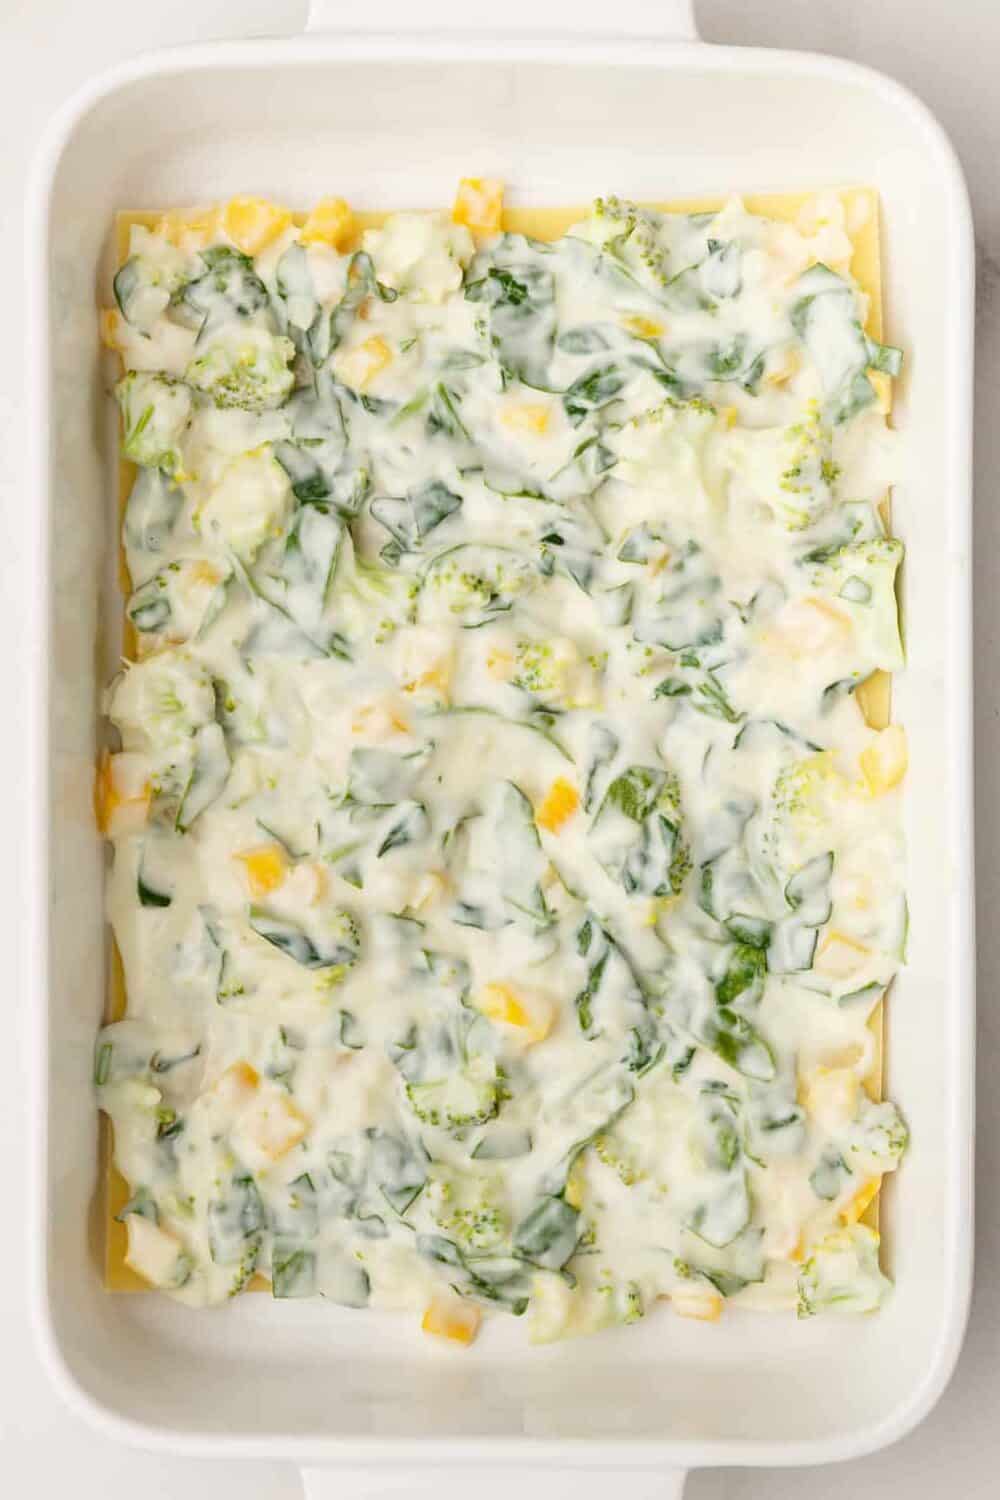 Top down image of a 9 x 13 casserole dish with vegetable lasagna filling and pasta layers.